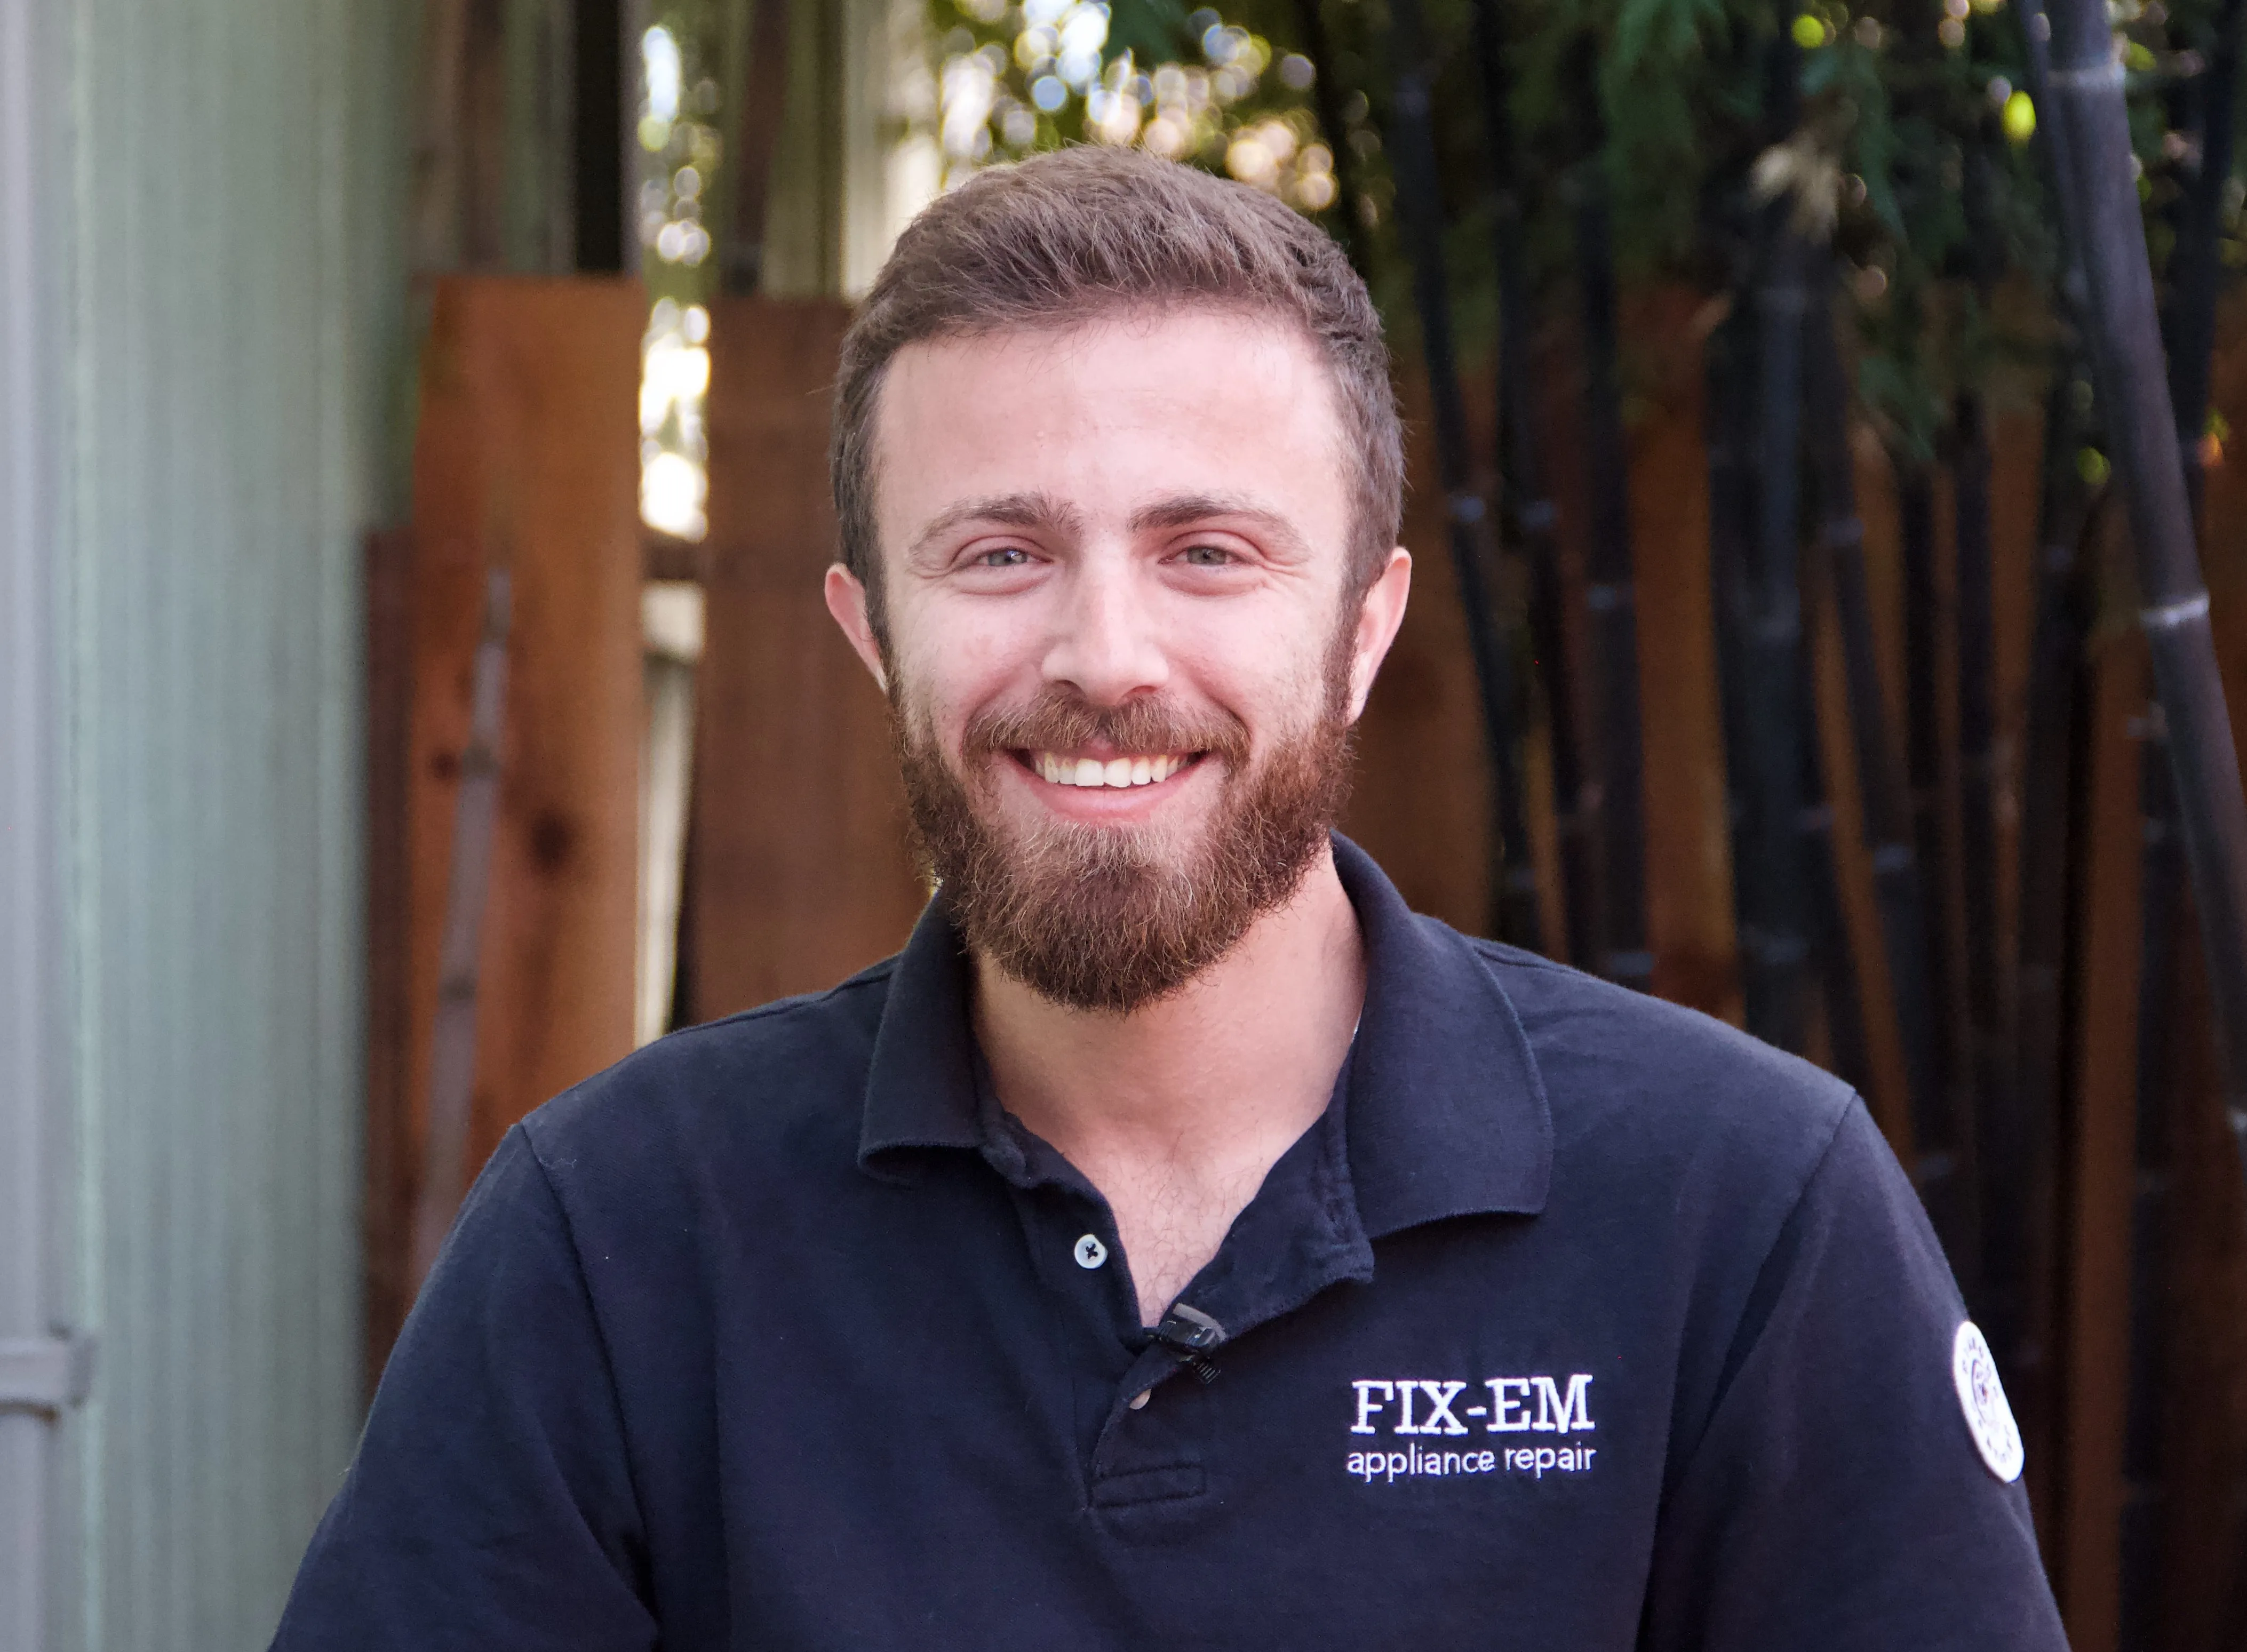 Moshe Spund is owner of FixEm Appliance Repair, a Diamond Certified company. He can be reached at (925) 386-6928 or by email.